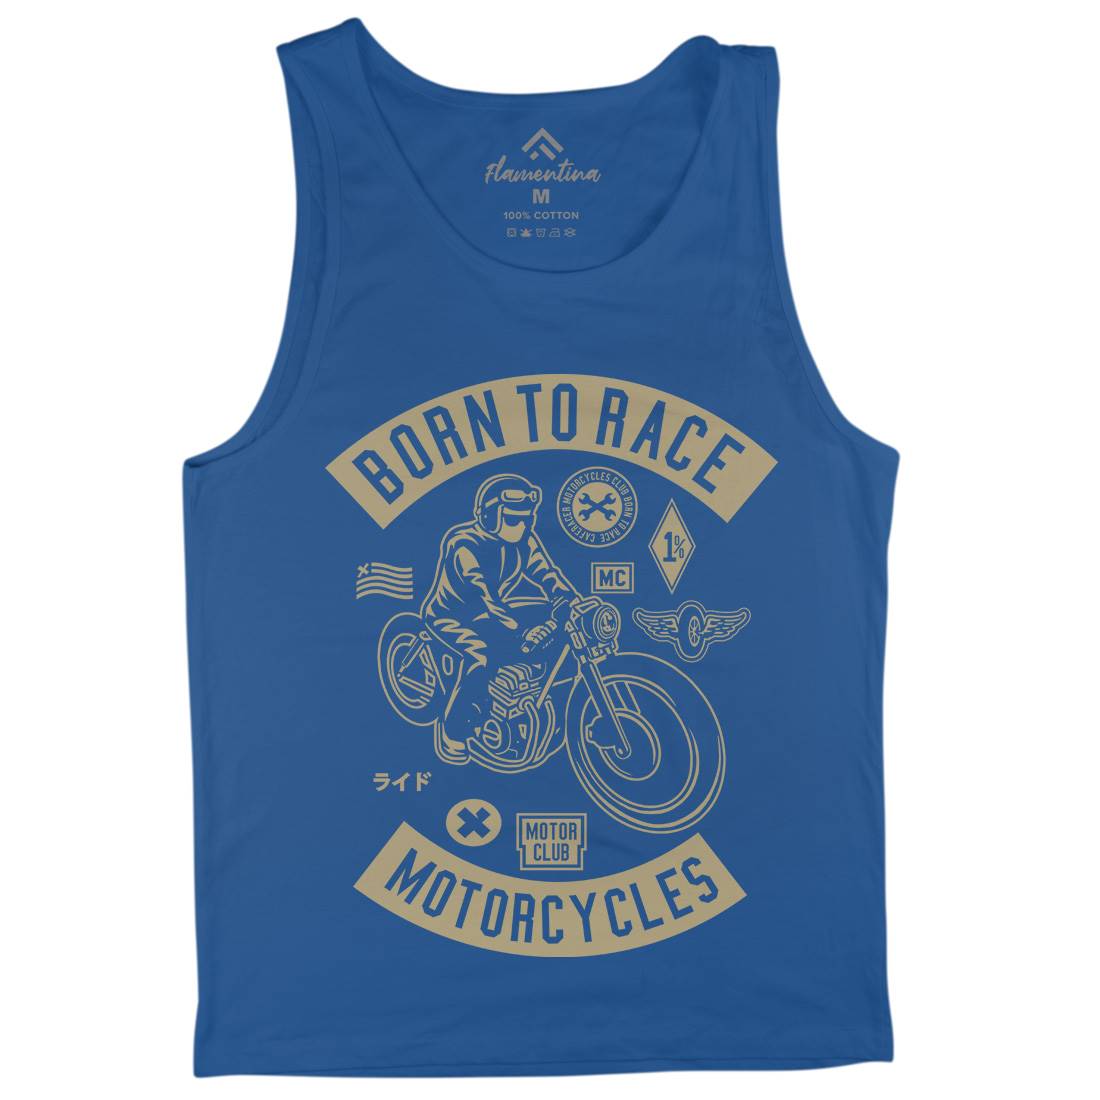 Born To Race Mens Tank Top Vest Motorcycles A210